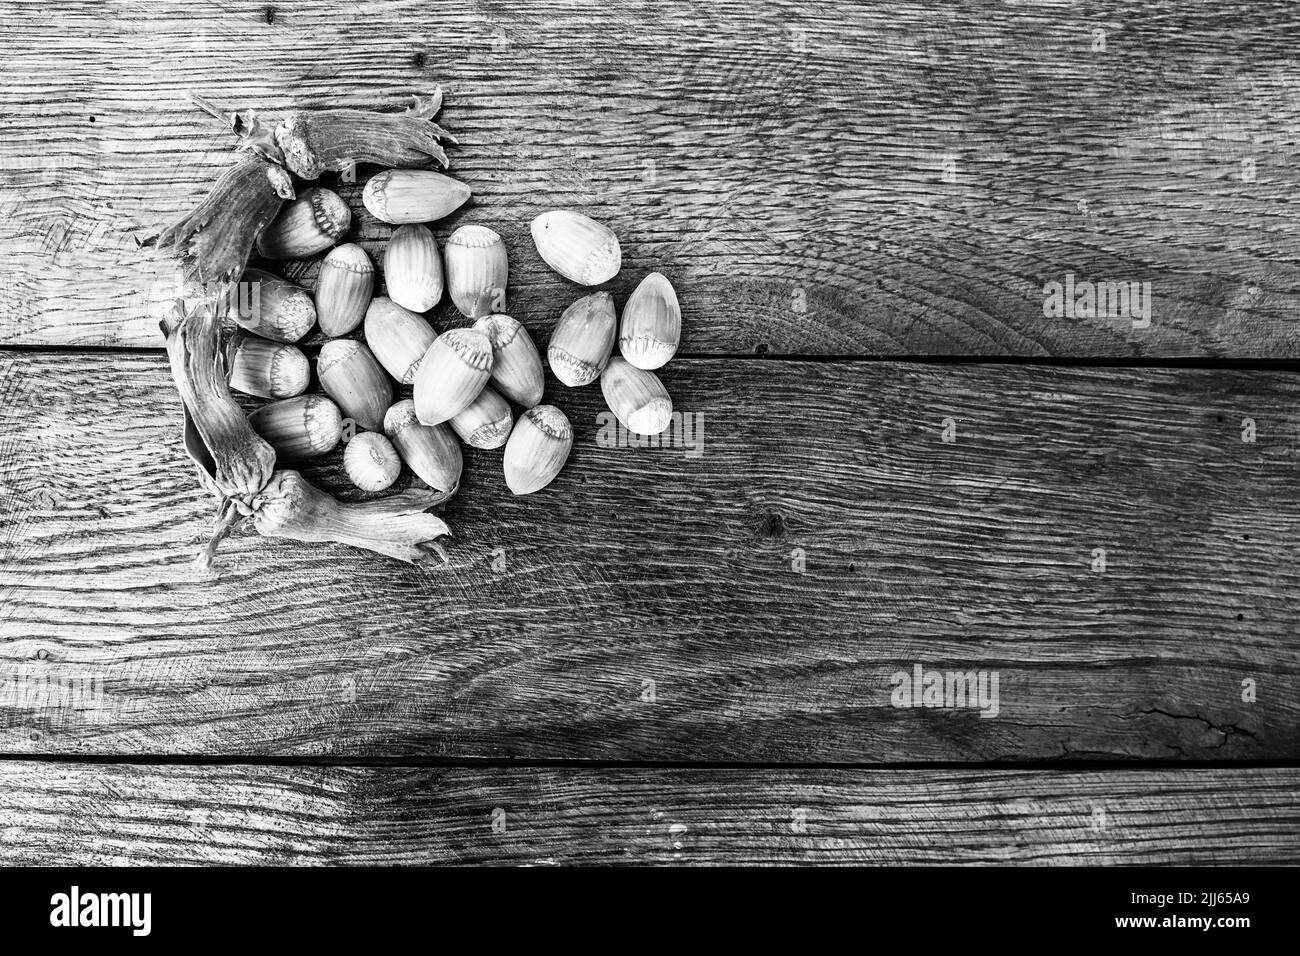 Red hazelnuts on a wooden board. Isolated hazelnuts. Stock Photo